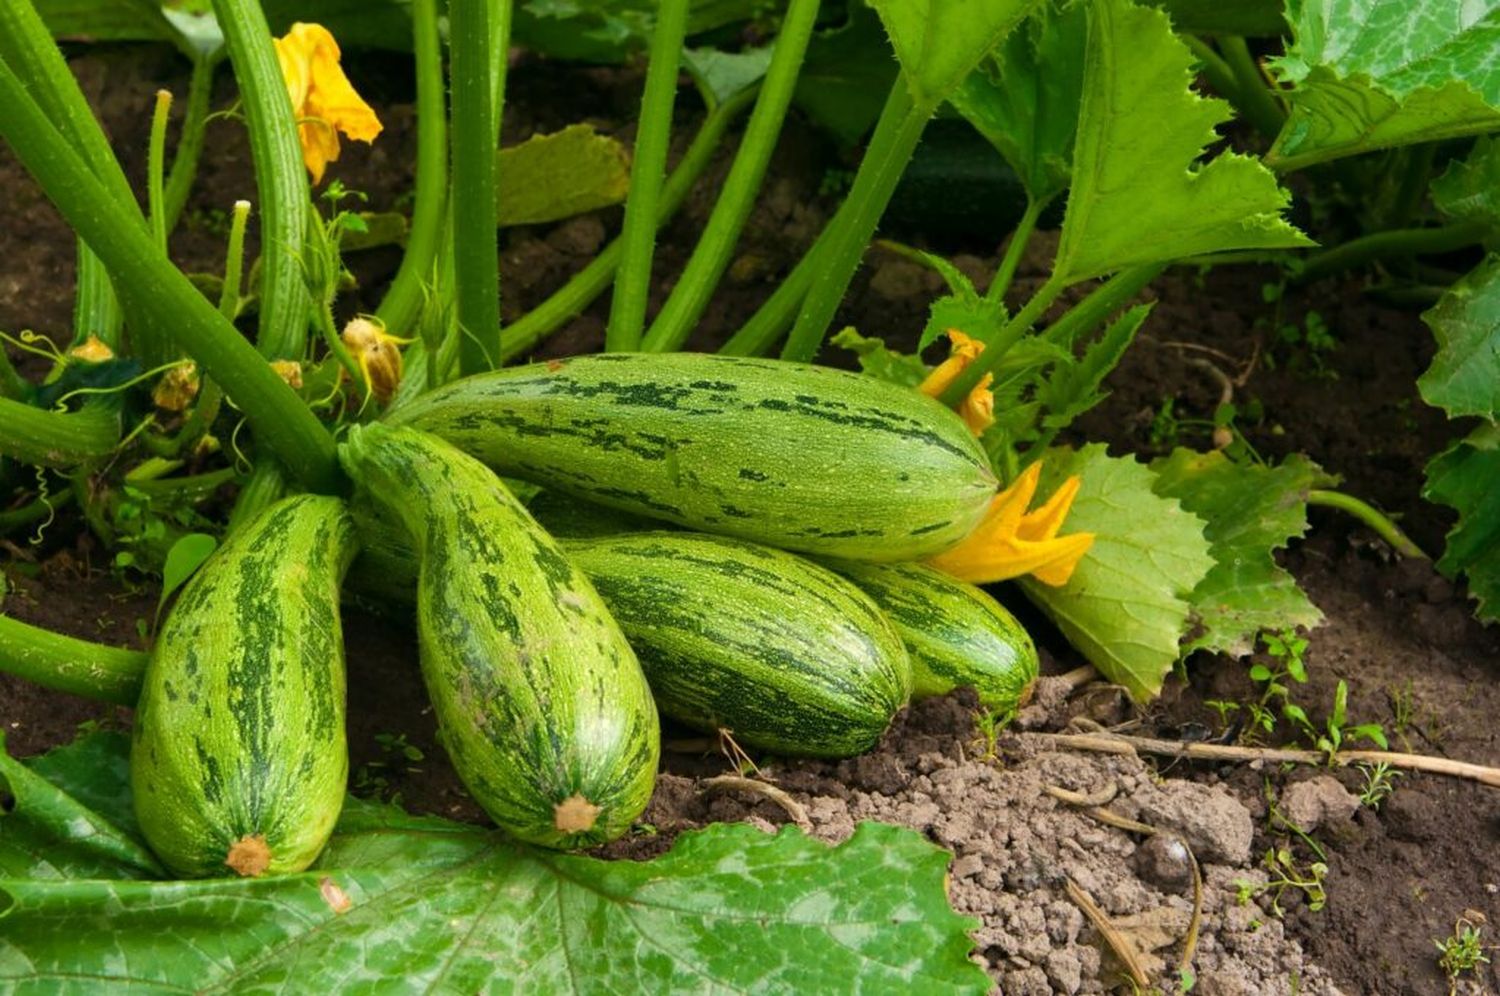 Courgettes: how to grow, care for and harvest